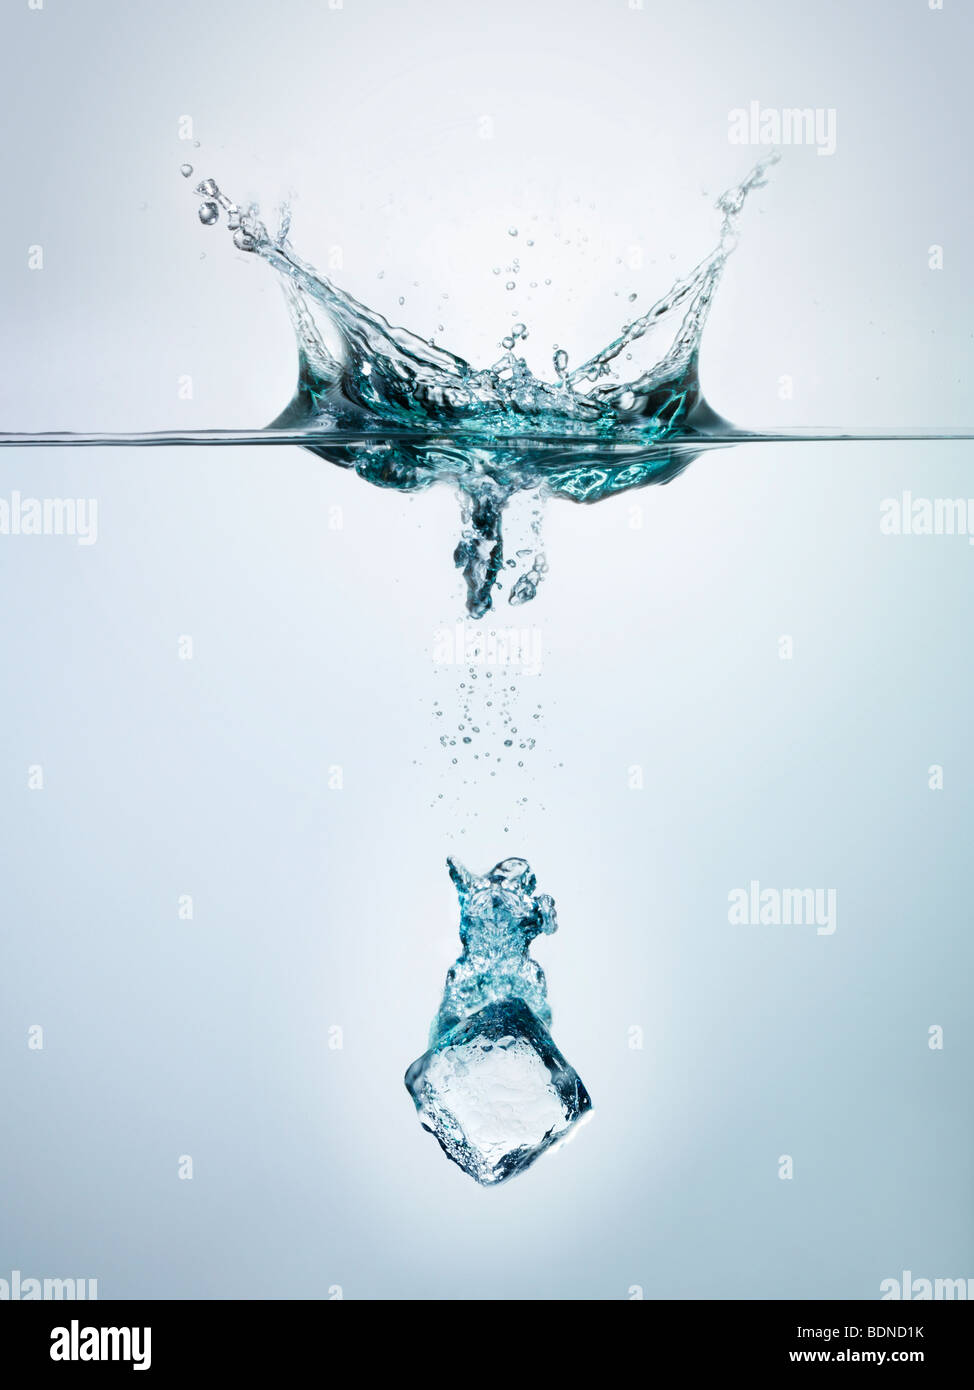 Ice cube splashing into clear water, surface view Stock Photo